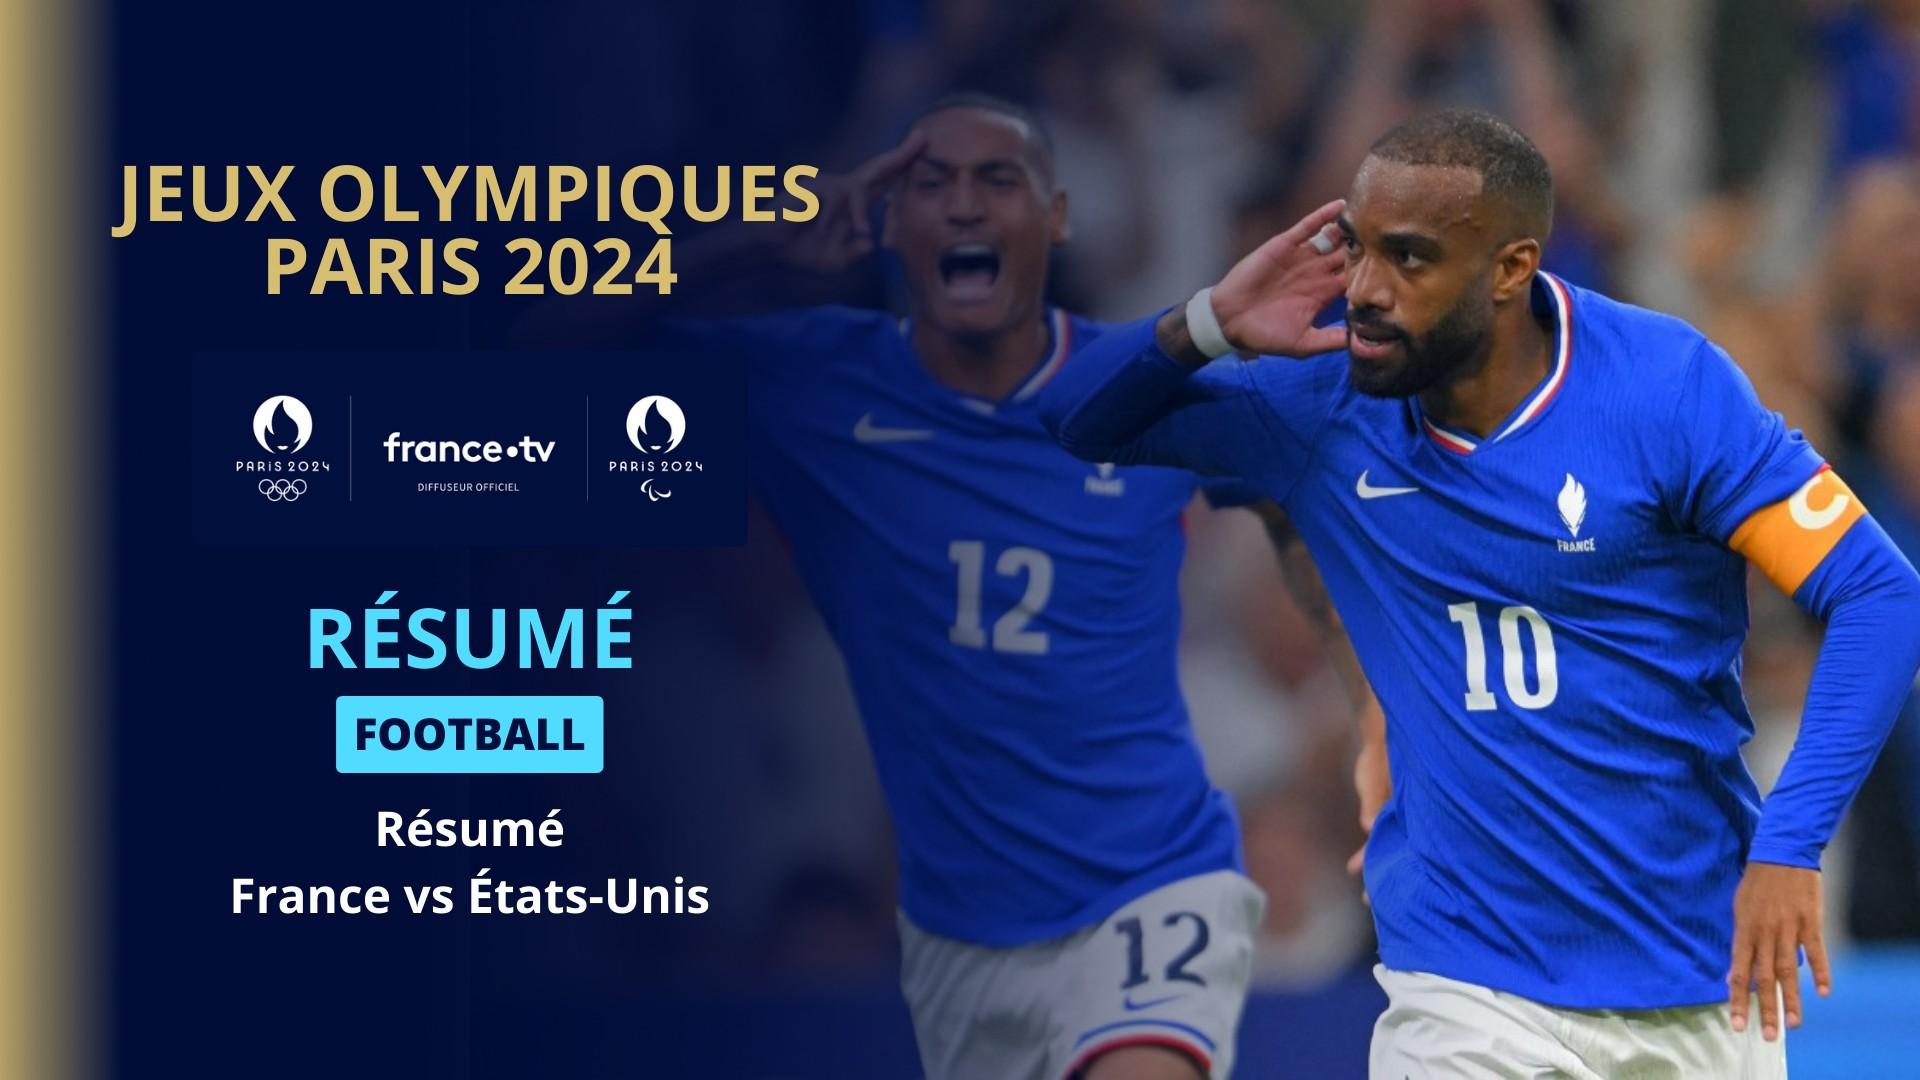 Relive the highlights of Thierry Henry's first match for Les Bleus against the USA.